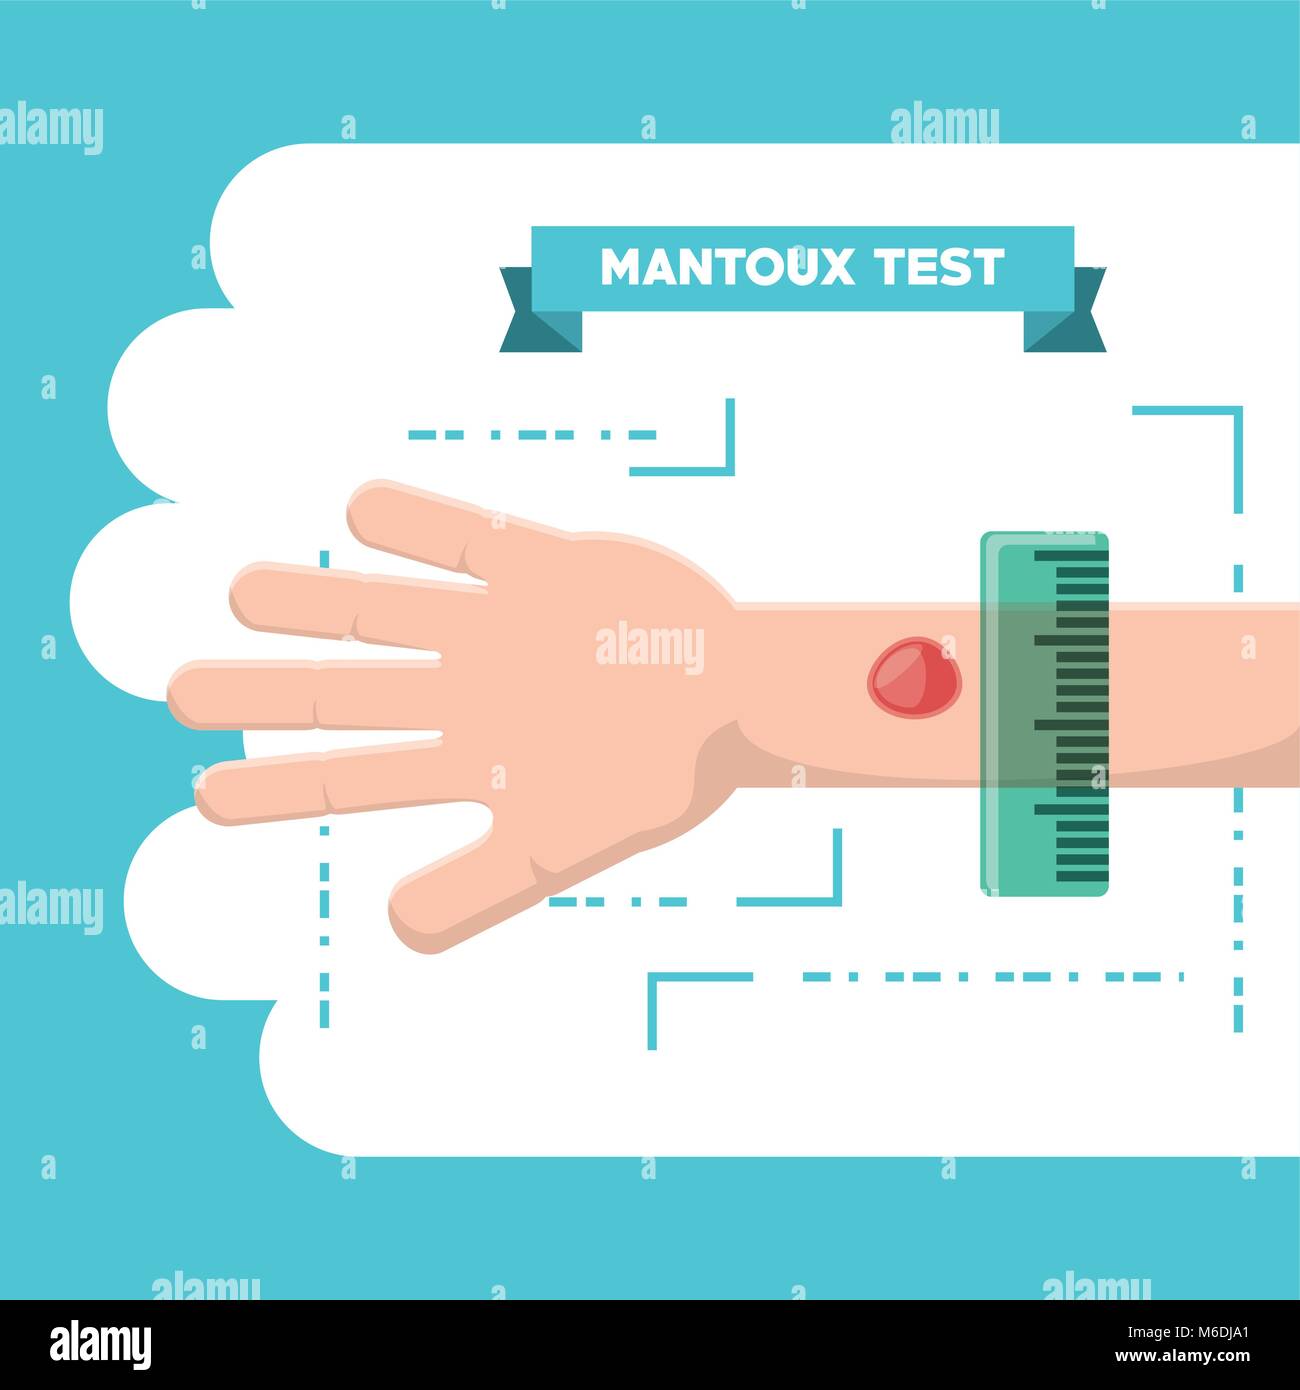 Mantoux test design with hand and injection over blue and white background, colorful design vector illustration Stock Vector